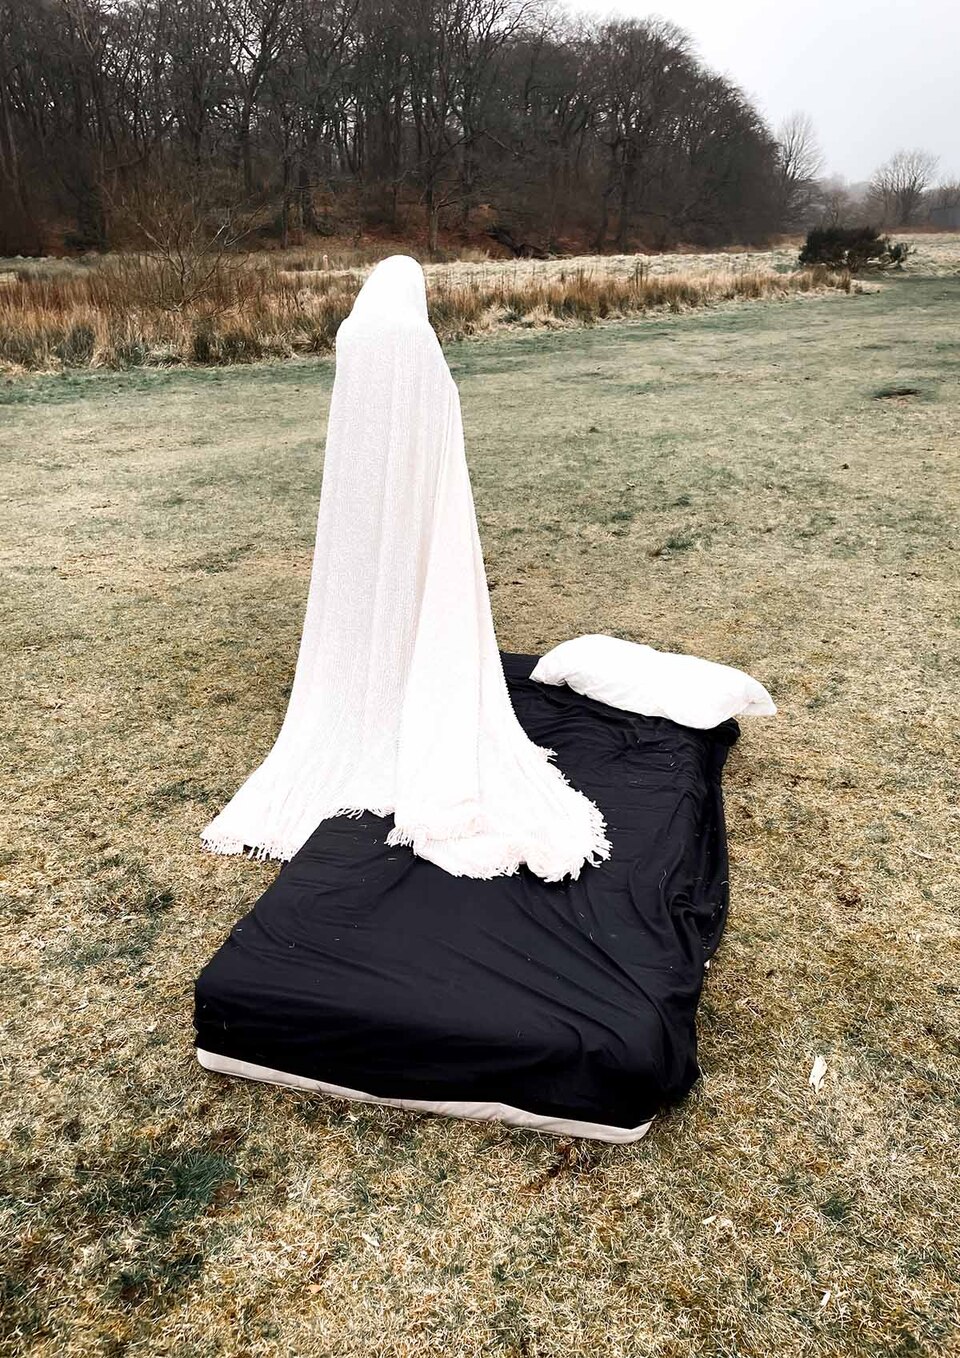 Rear view of a human figure wrapped from head to foot in a white blanket steps off a black-sheeted mattress in an open field